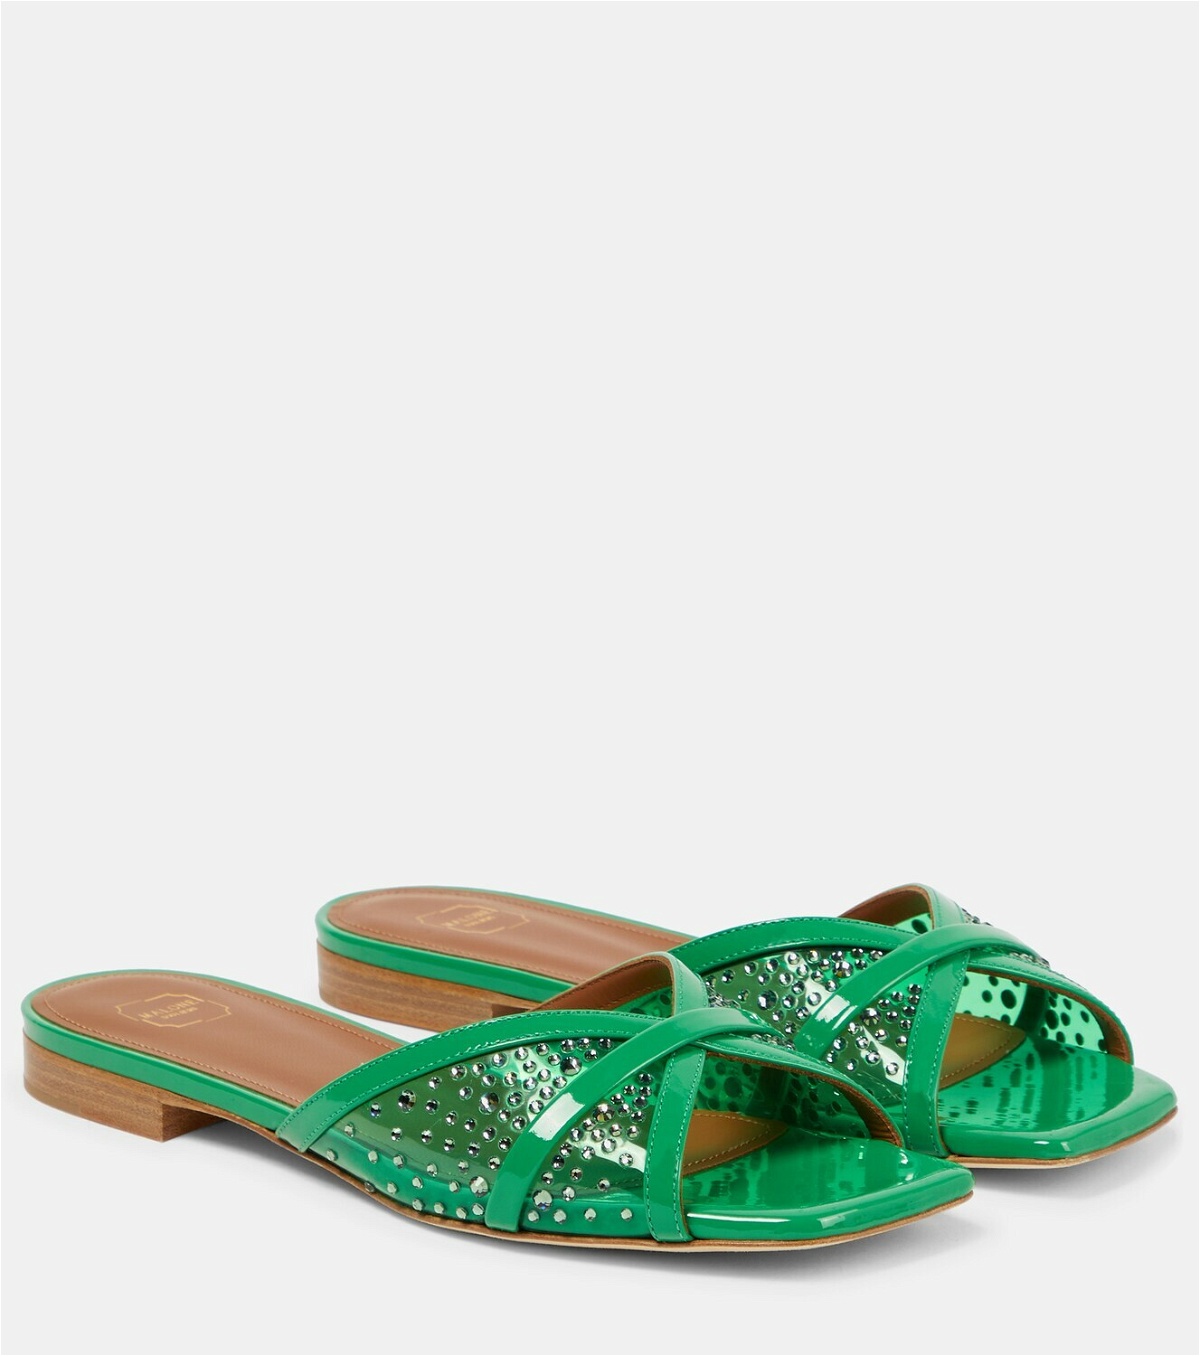 Malone Souliers Perla embellished PVC and leather sandals Malone Souliers